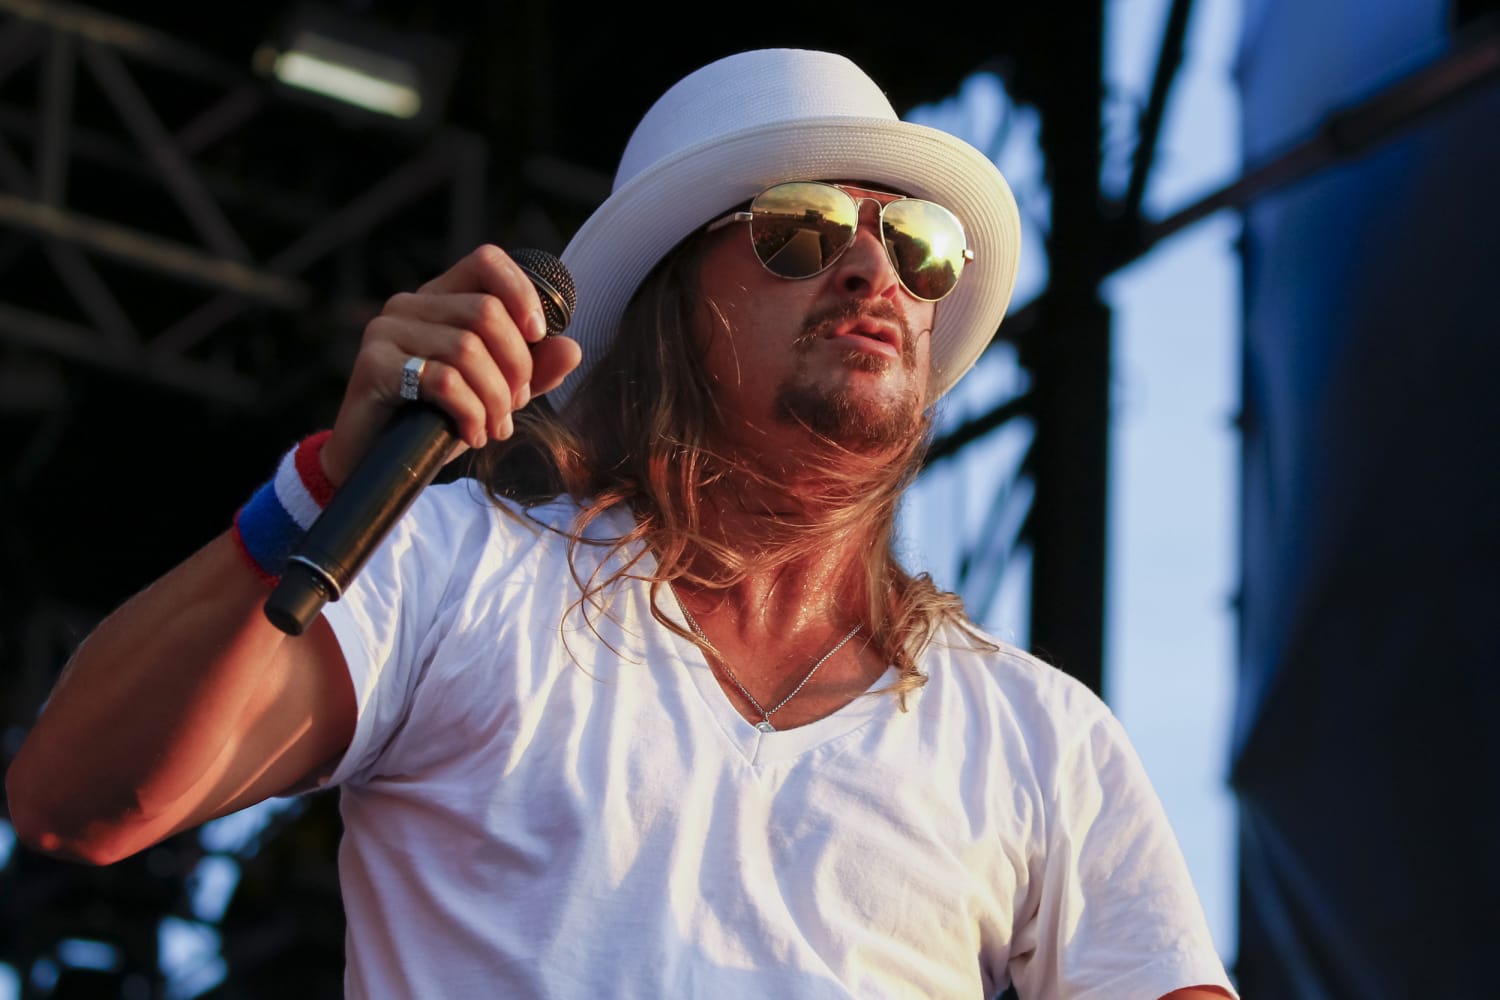 Kid Rock says he won't perform at venues that require vaccines or masks